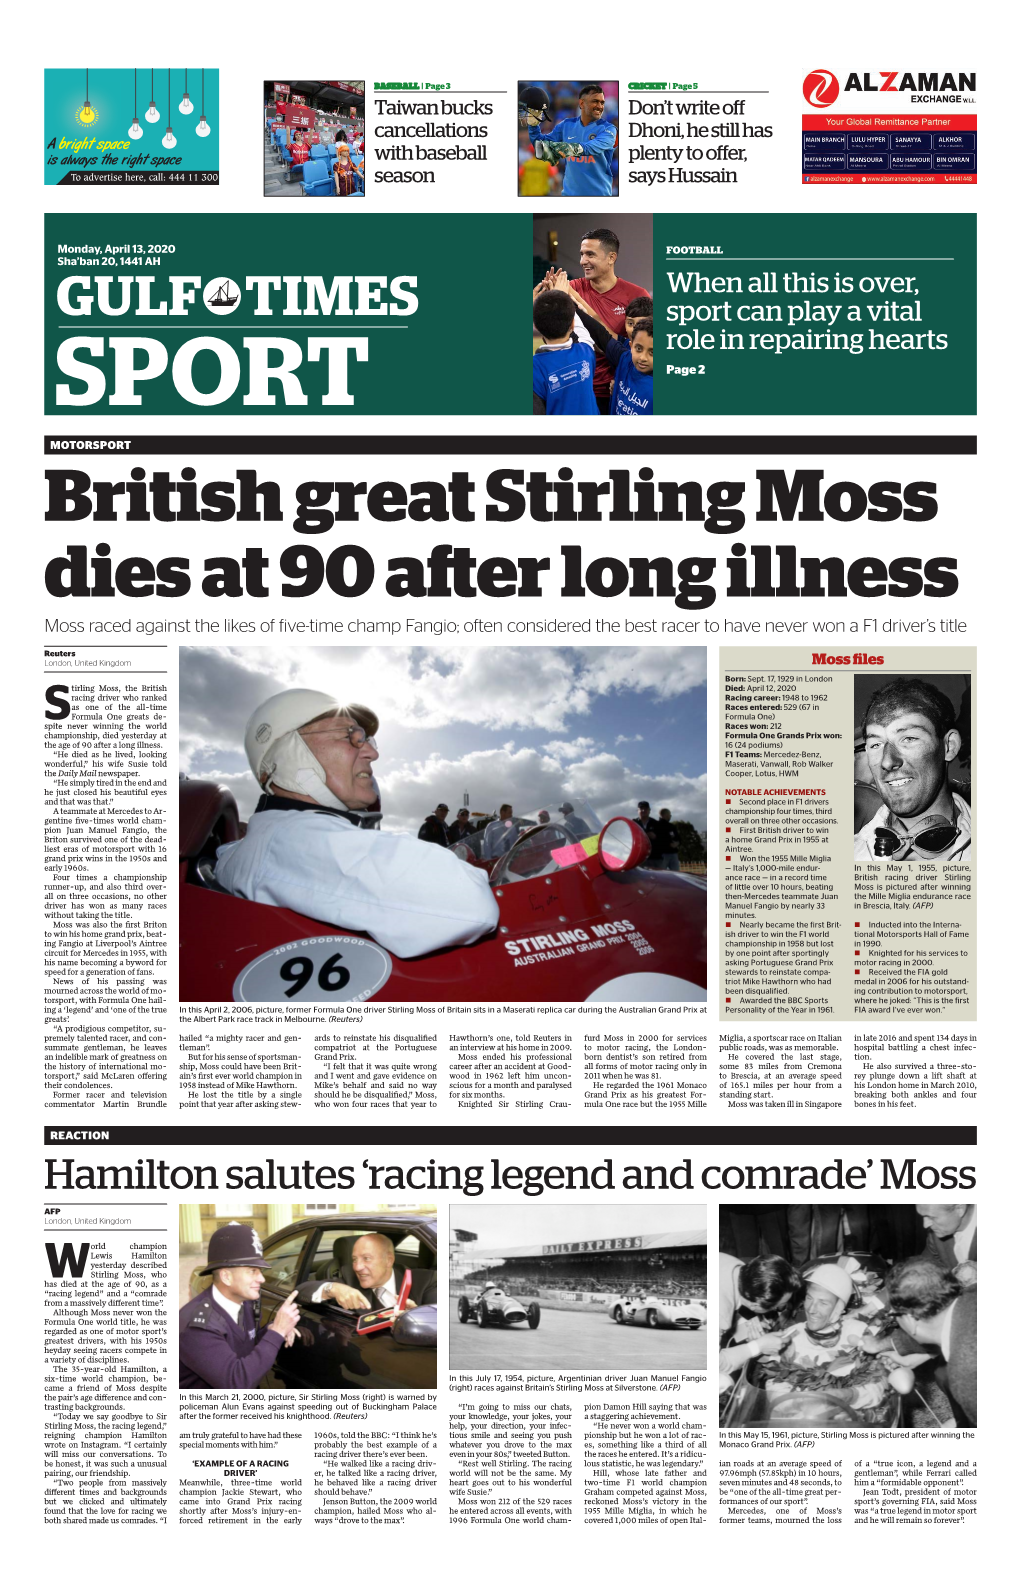 British Great Stirling Moss Dies at 90 After Long Illness